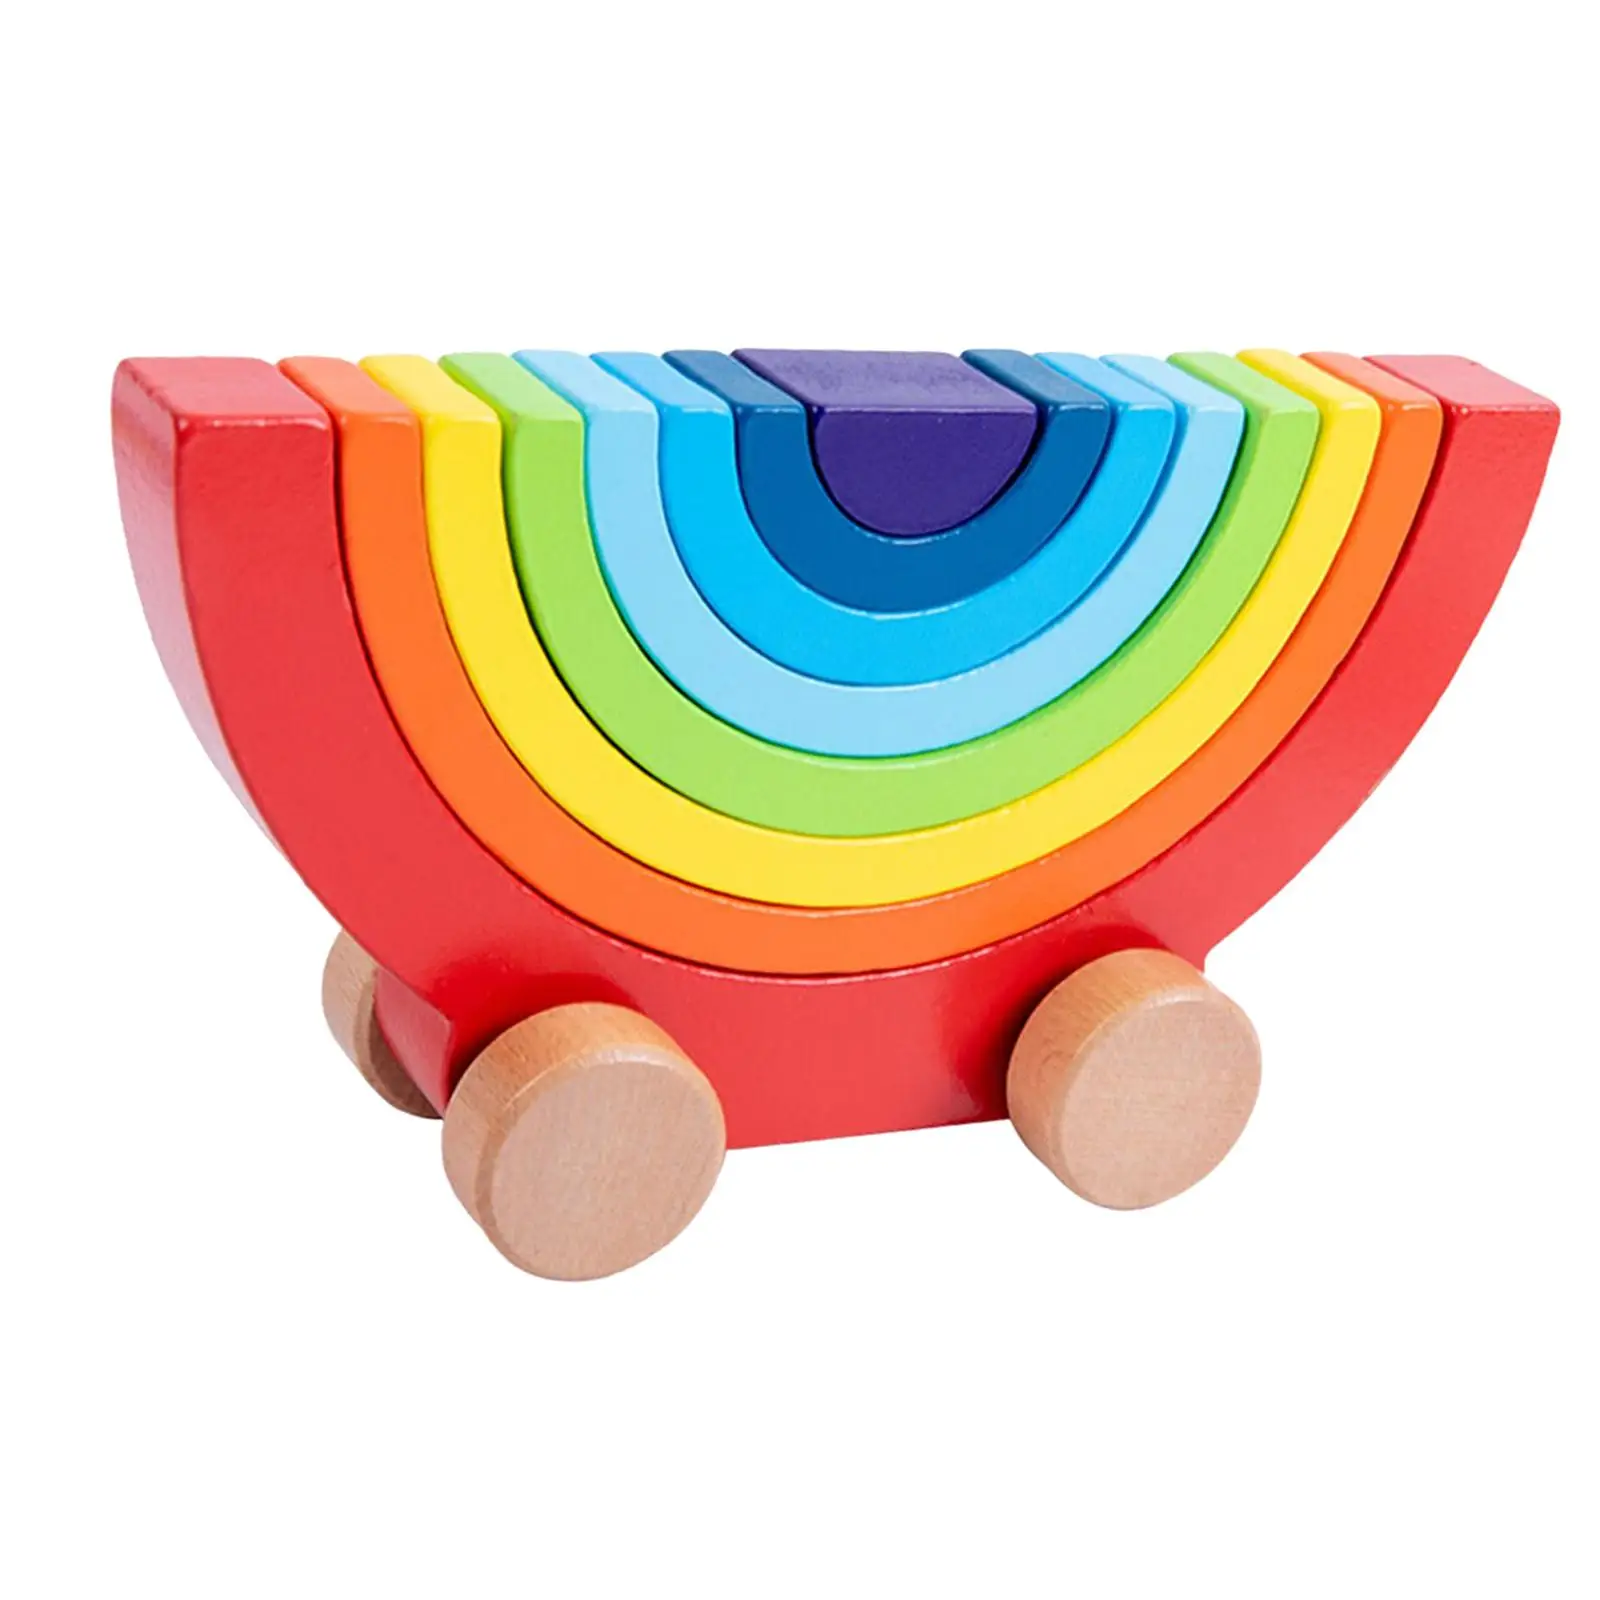 Wooden Building Blocks Car Toy Stacking Colorful Creative for Game Toddlers